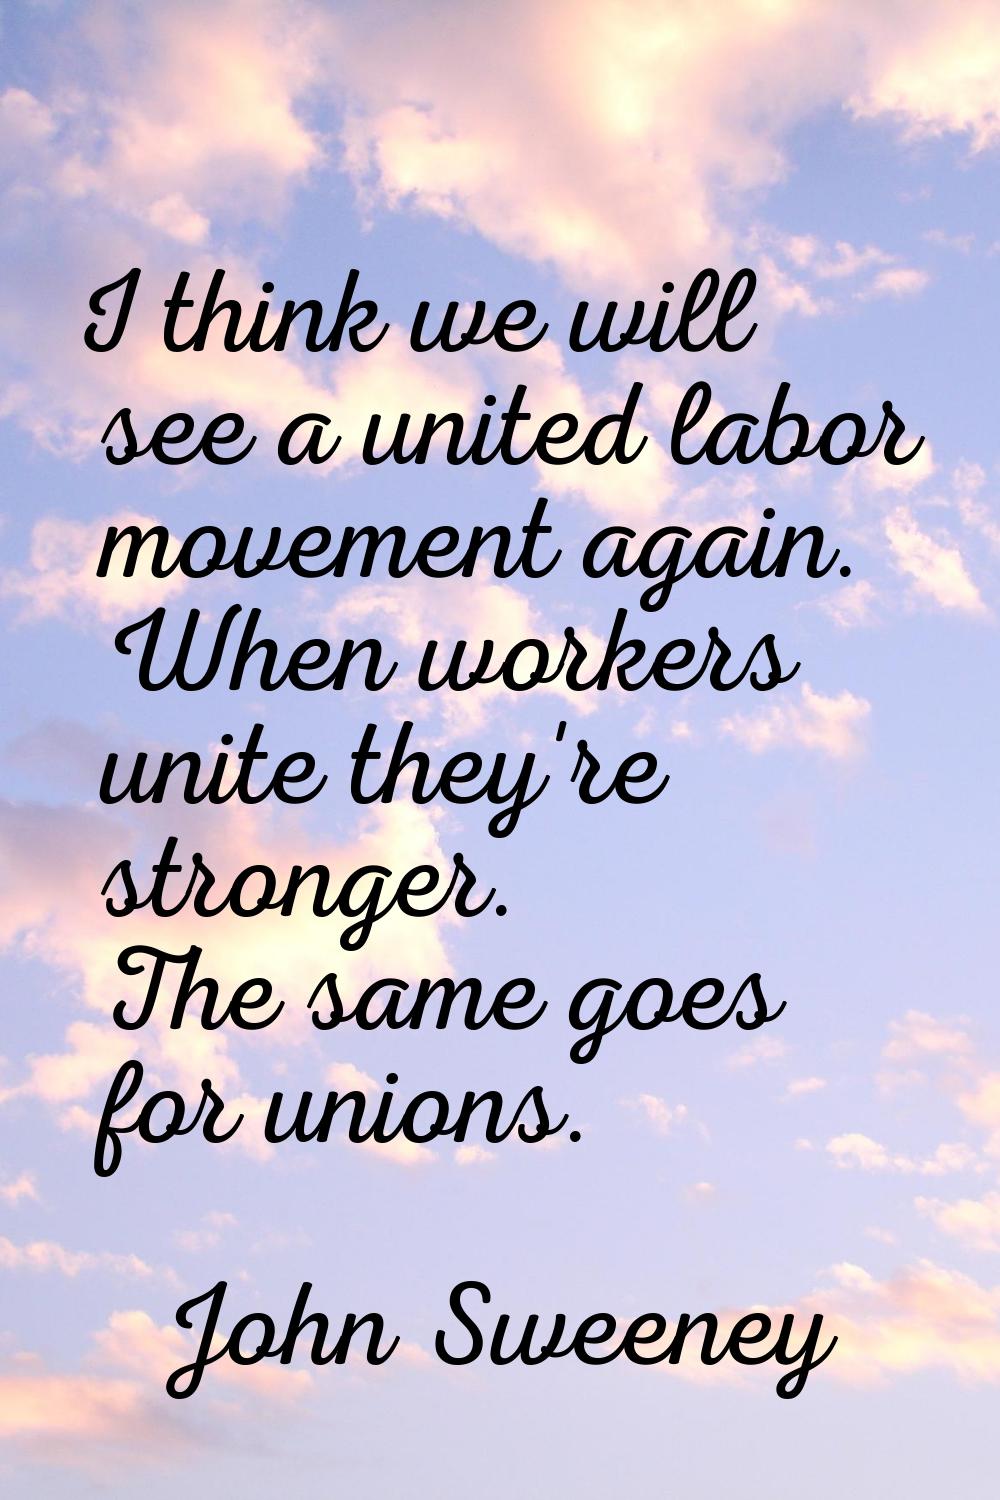 I think we will see a united labor movement again. When workers unite they're stronger. The same go